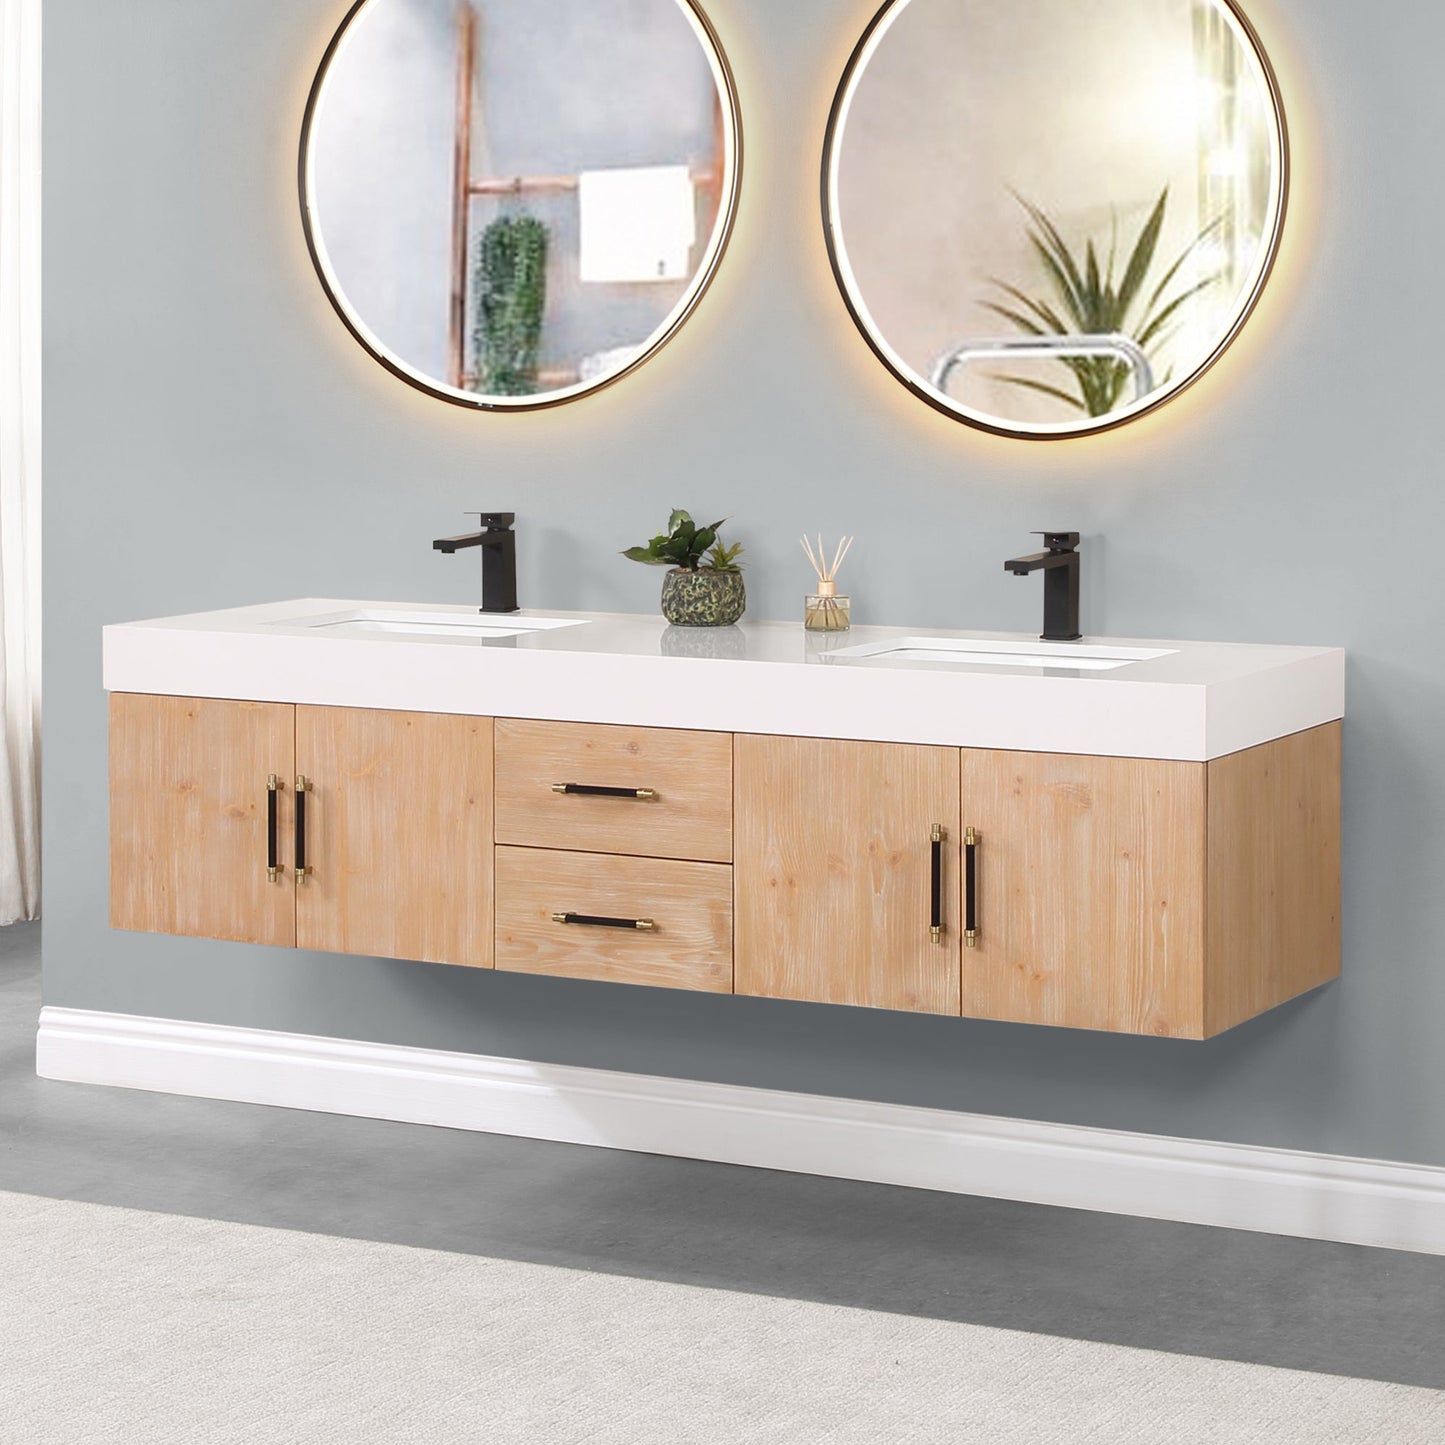 Corchia 72" Wall-mounted Double Bathroom Vanity in Light Brown with White Composite Stone Countertop without Mirror